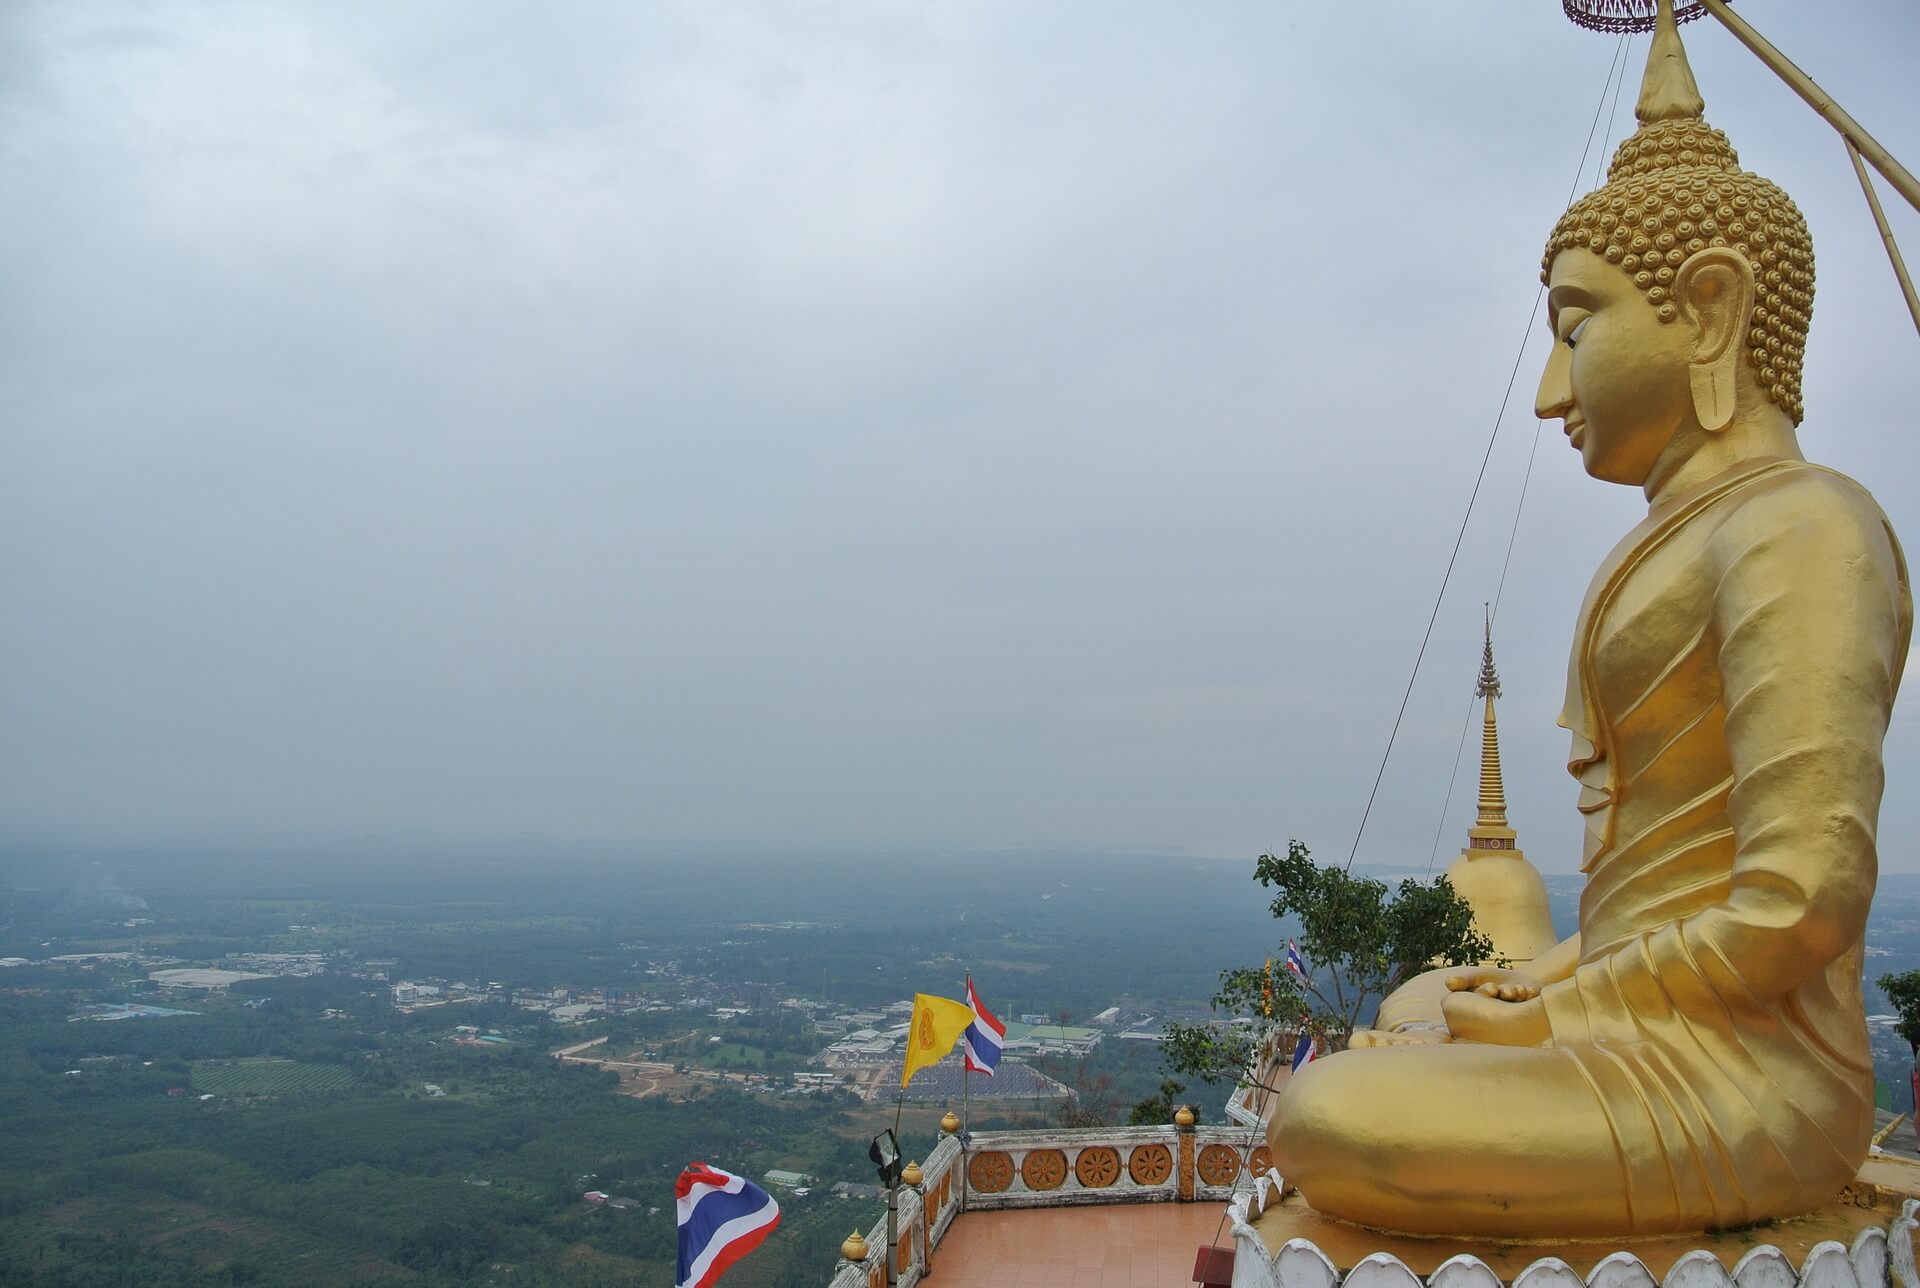 Golden Buddha statue at the summit of the Tiger Cave temple in Krabi